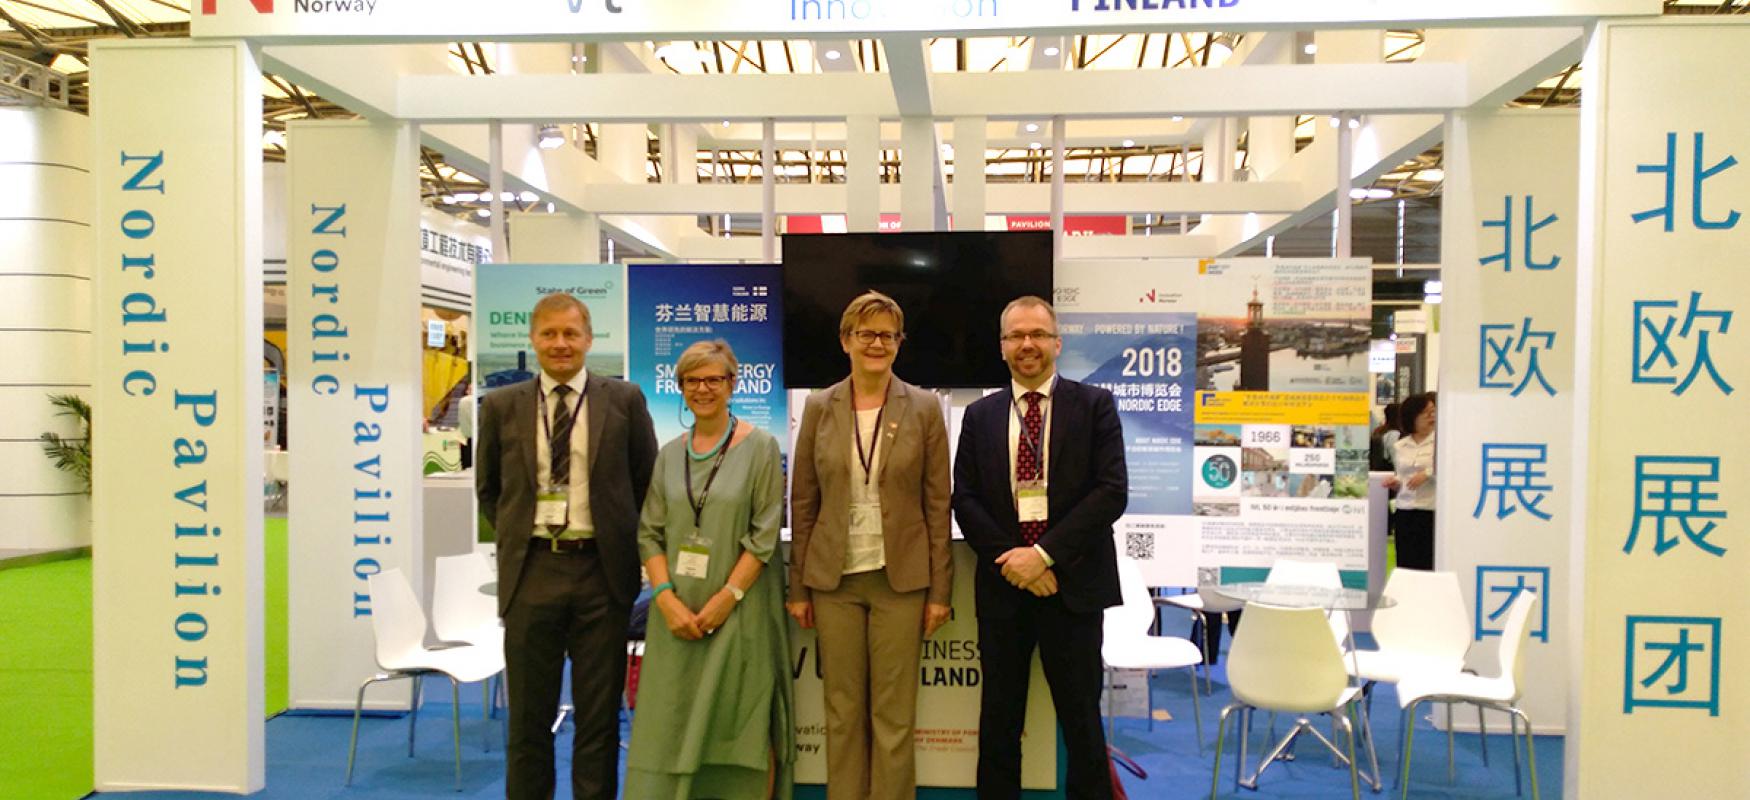 Nordic ambassadors in front of the Nordic pavilion at IE Expo 2018 in Shanghai.